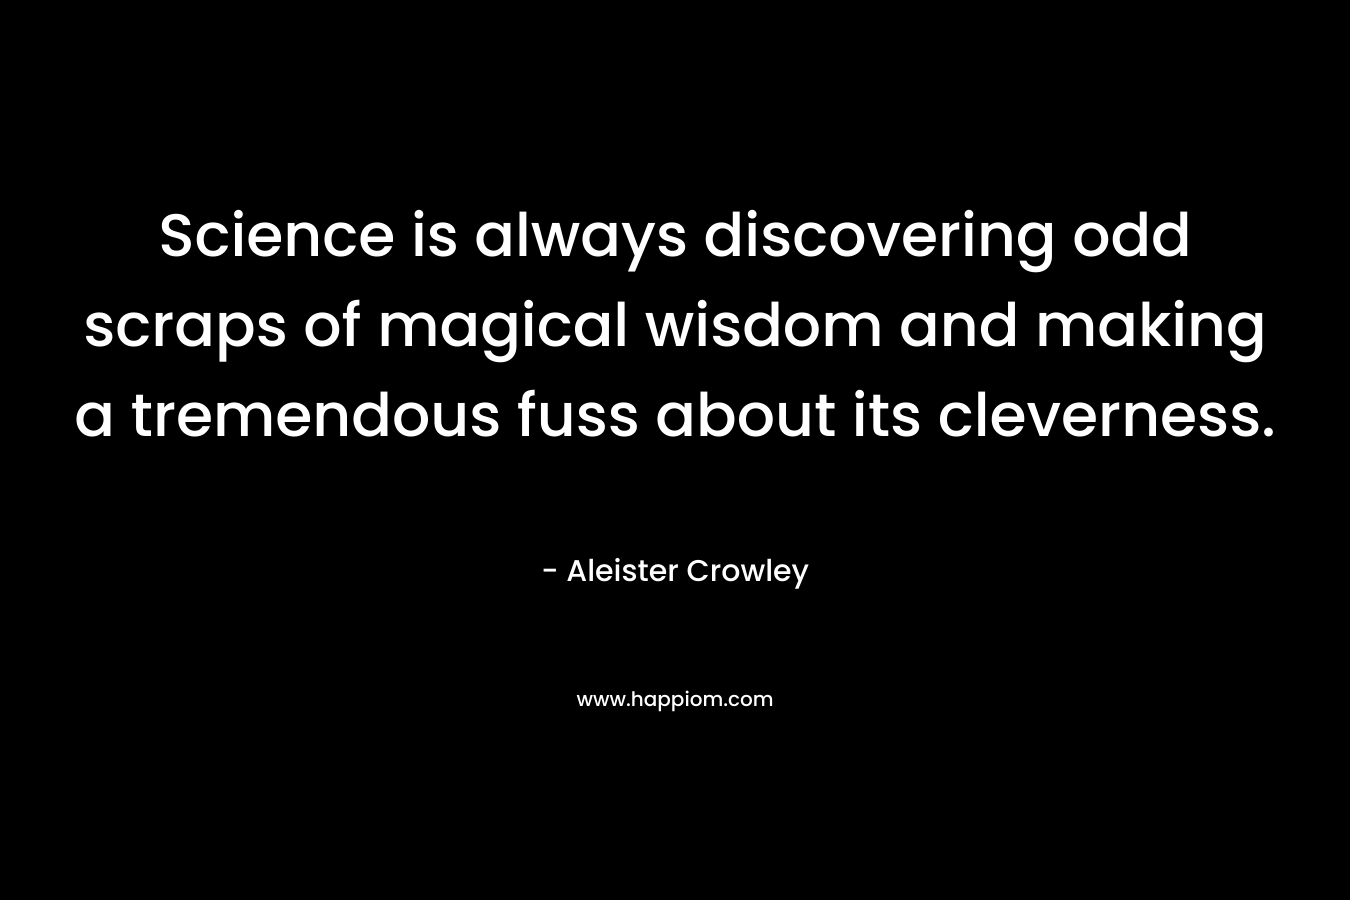 Science is always discovering odd scraps of magical wisdom and making a tremendous fuss about its cleverness.